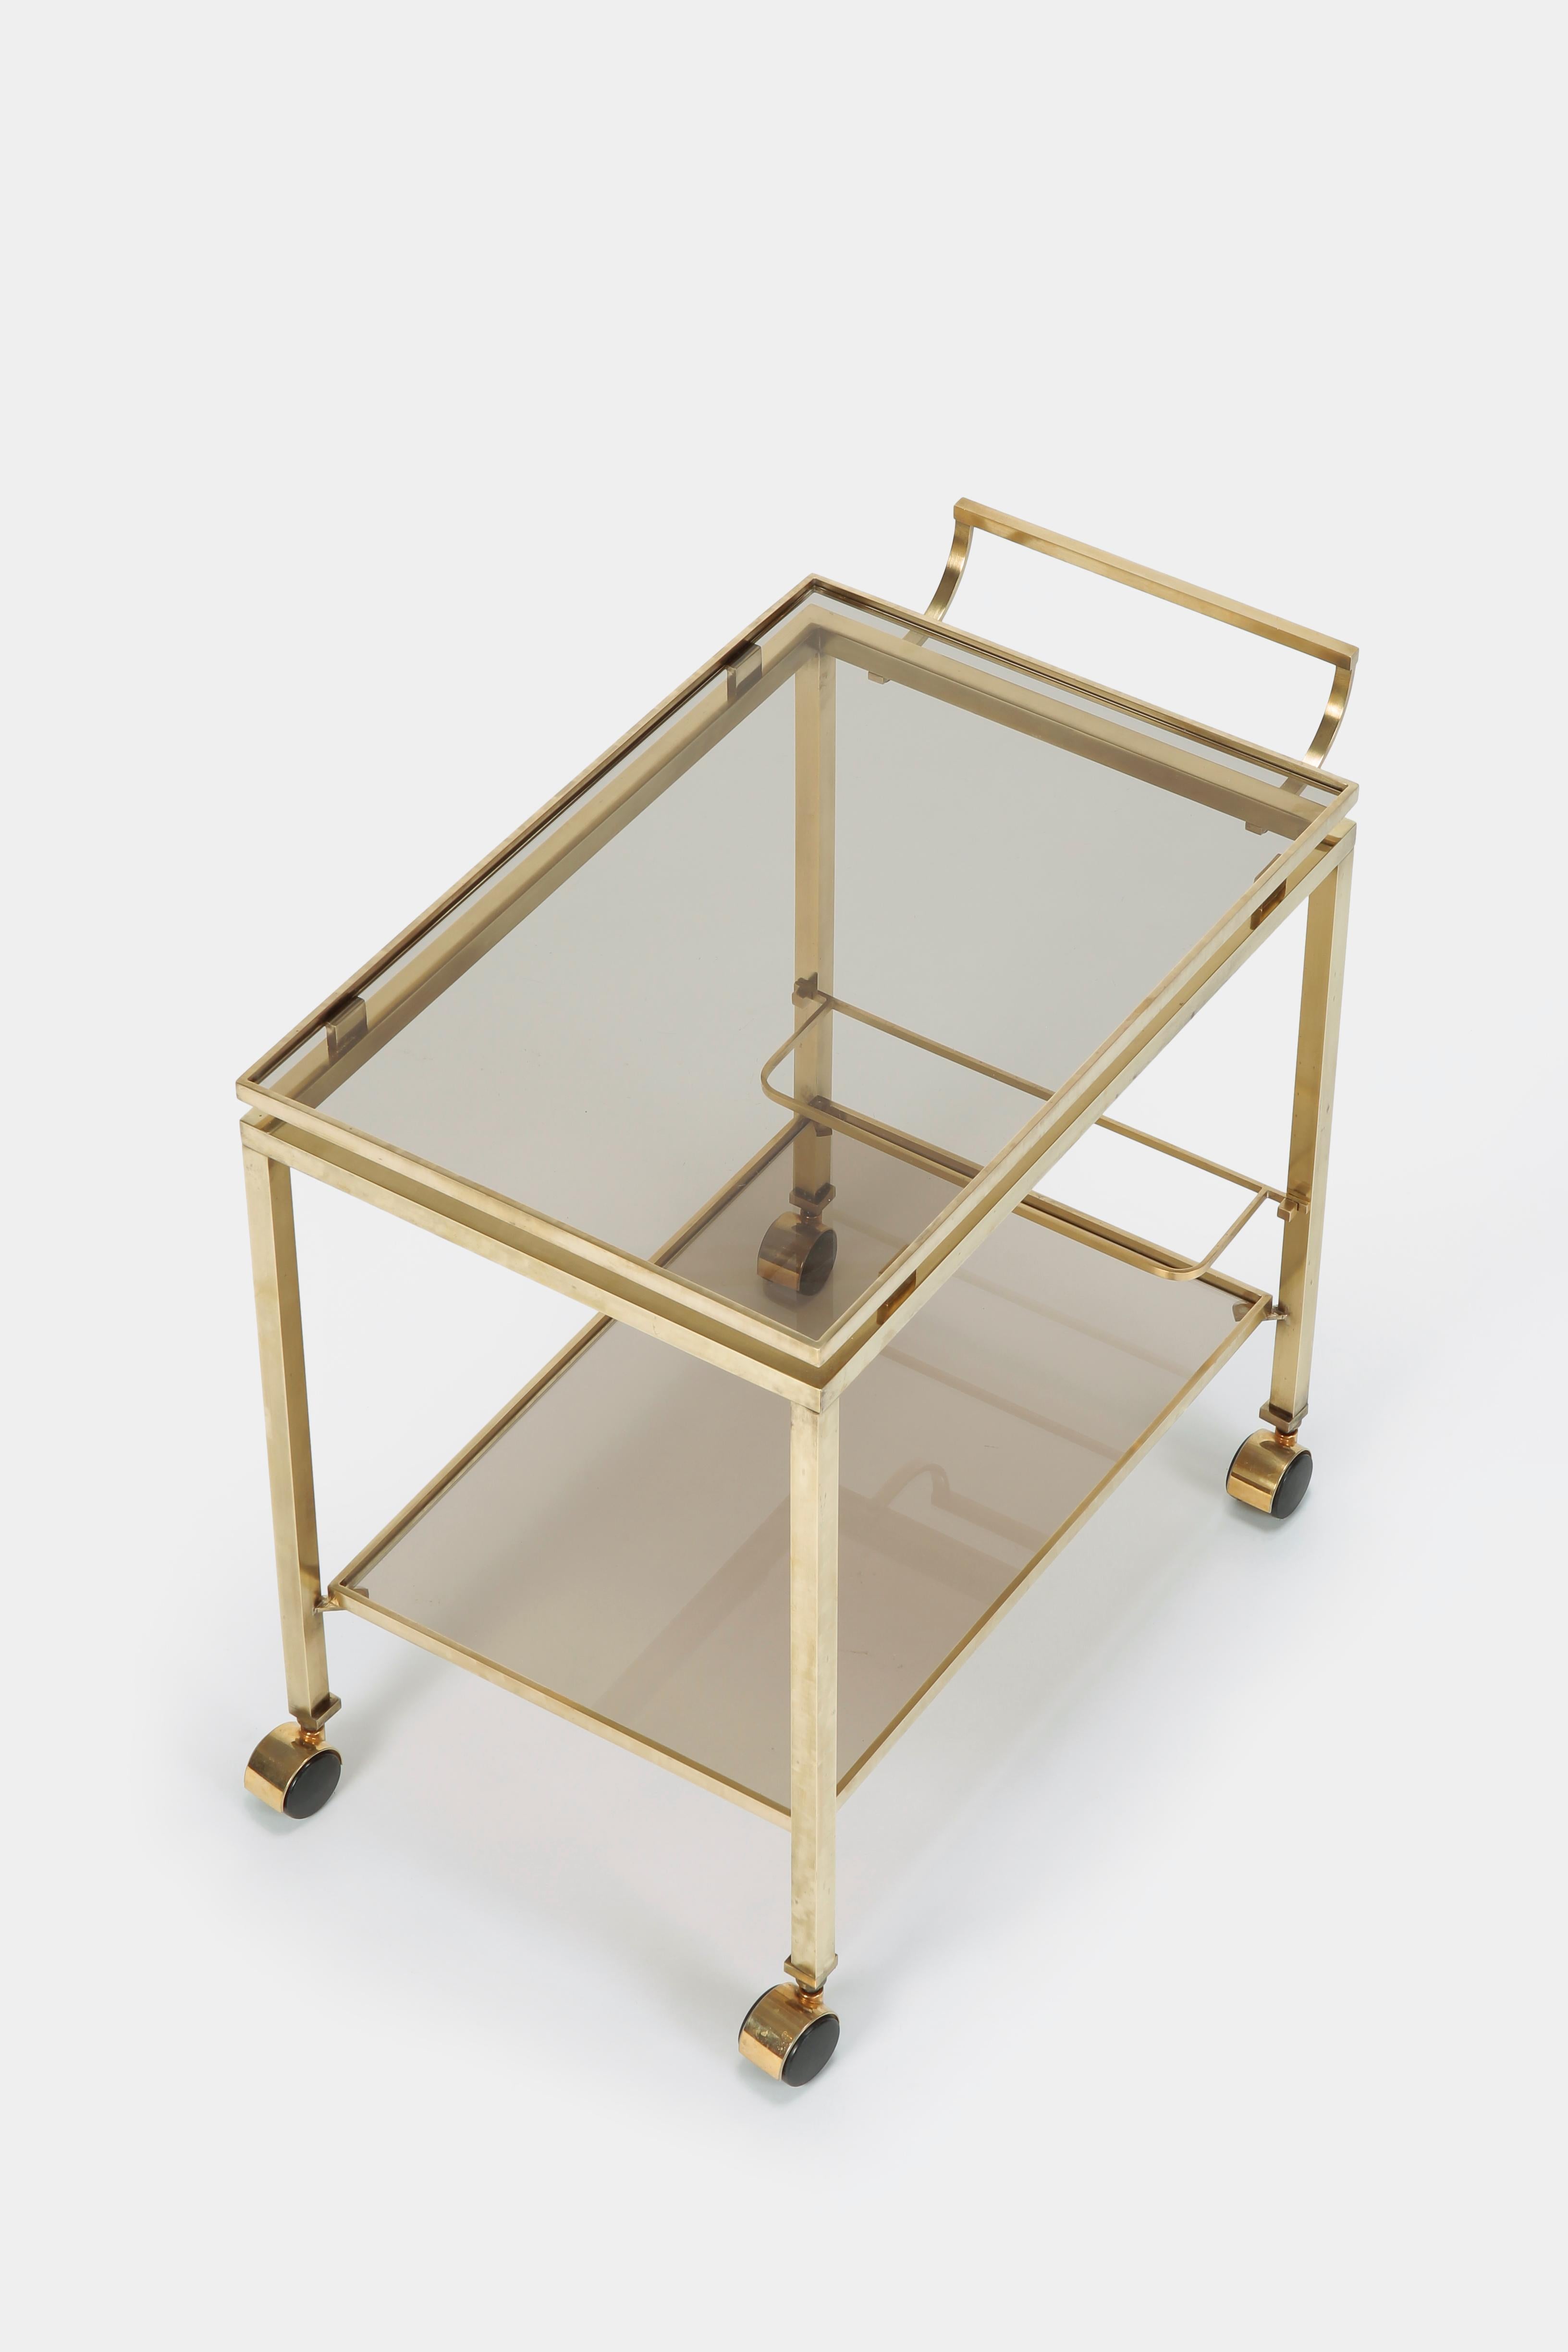 Designed by Guy Lefèvre for Maison Jansen. Serving trolley manufactured the 1960s, Paris, France. Elegant piece made of solid brass and smoked glass. The refined design makes the upper surface appear to float. Beverage holder on the bottom shelf.